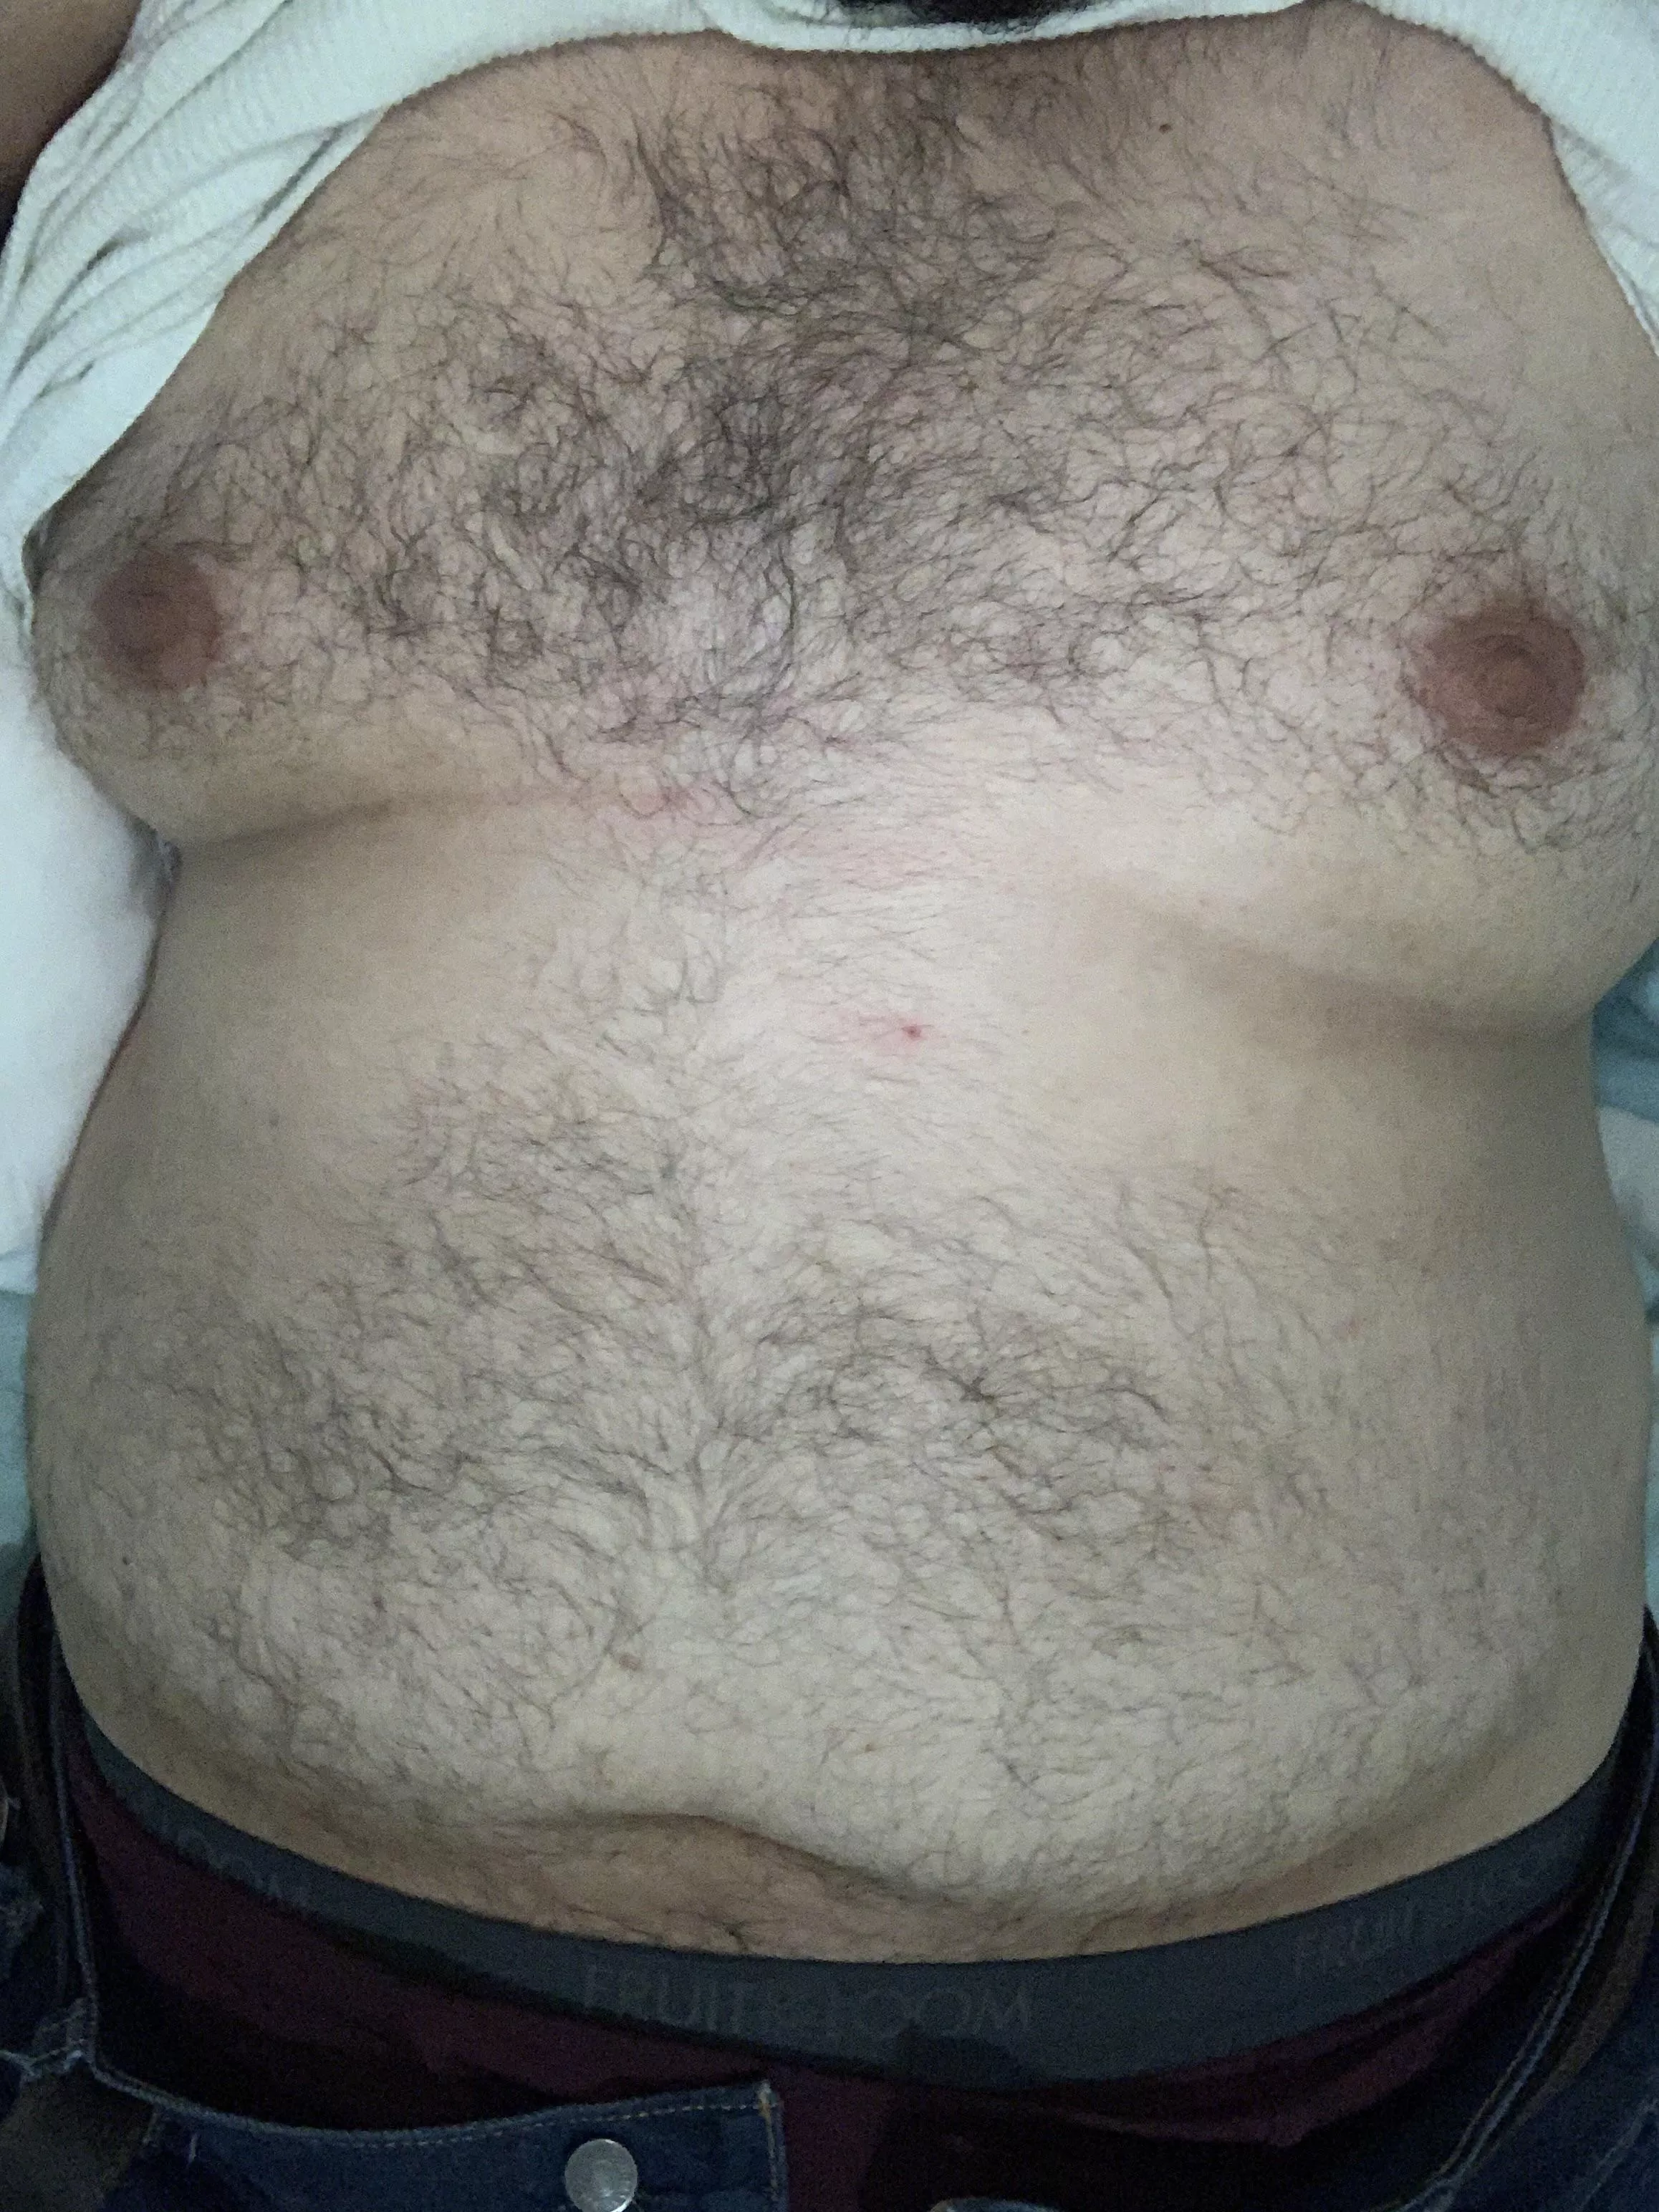 New Here Nudes Chubbydudes Nude Pics Org